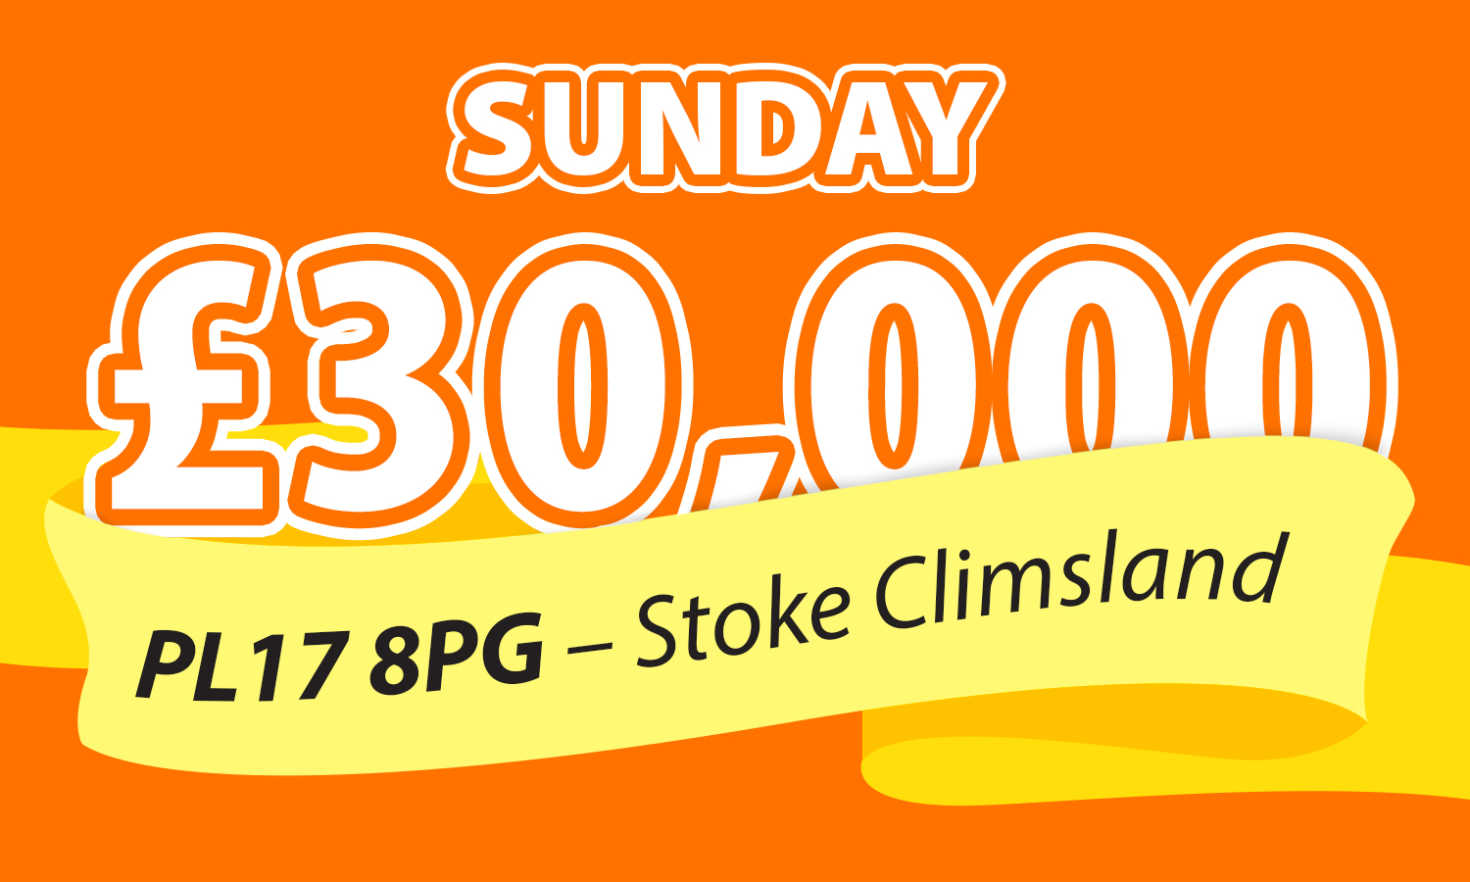 One Stoke Climsland player will be very happy indeed after scooping £30,000